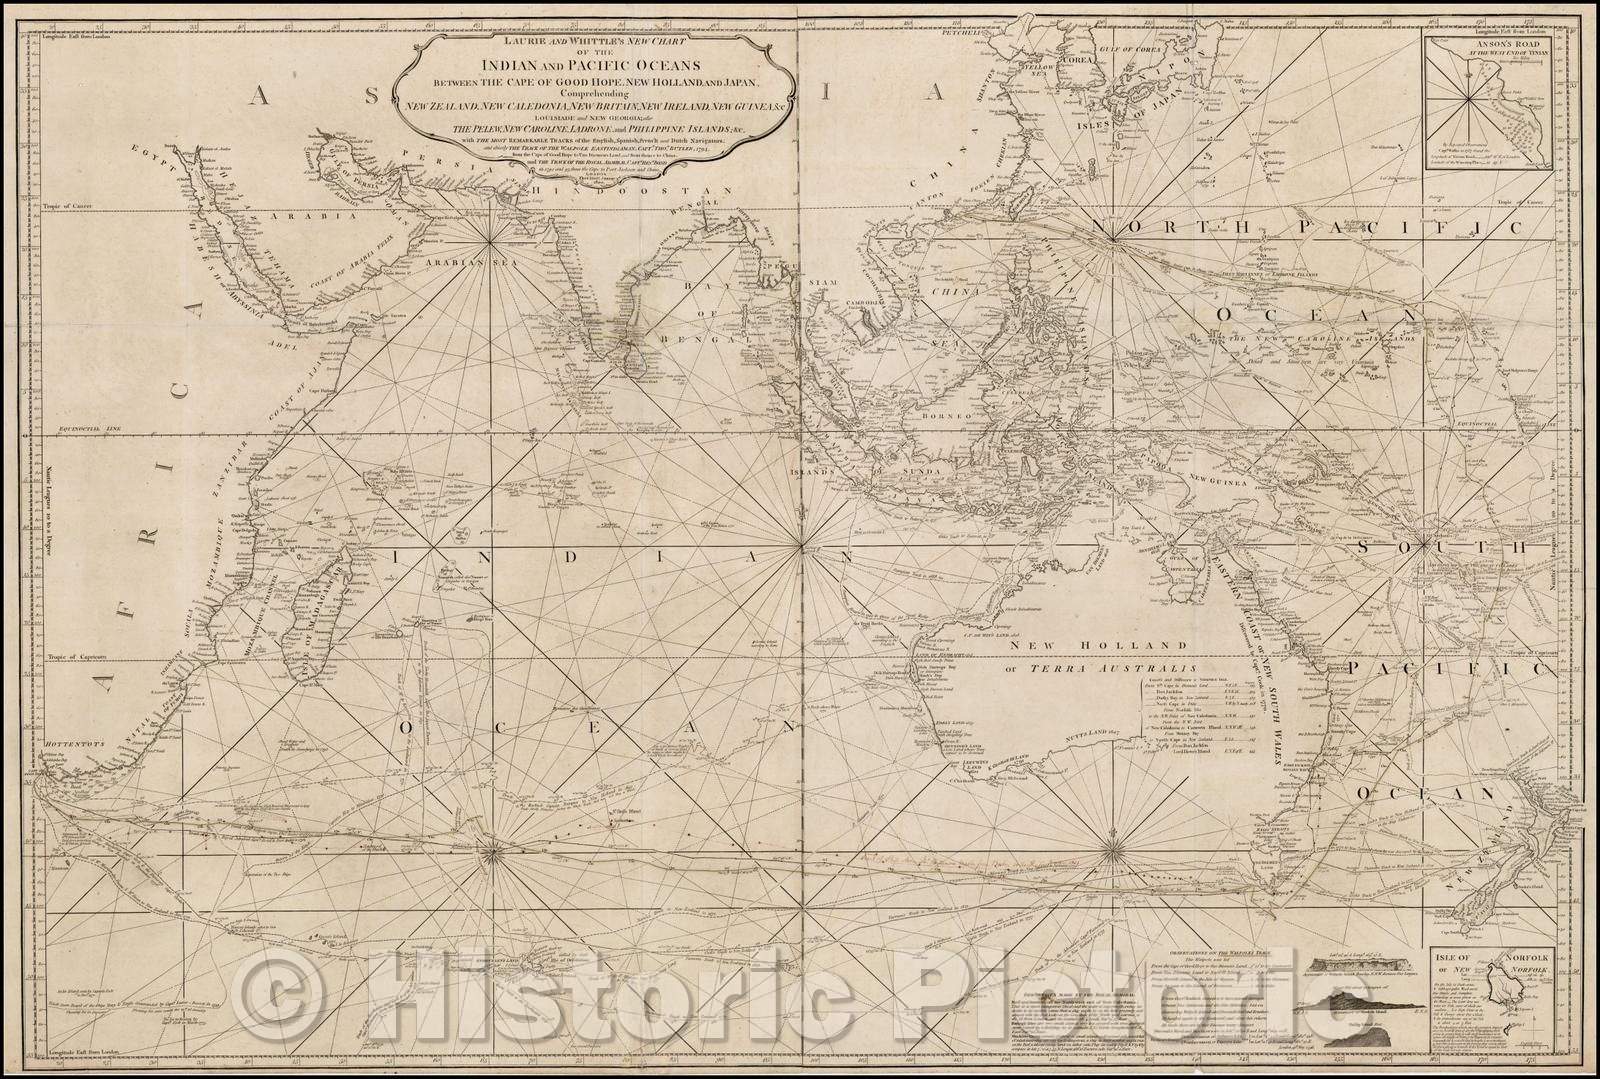 Historic Map - Laurie and Whittle's New Chart of the Indian and Pacific Oceans Between the Cape of Good Hope, New Holland and Japan, 1800, Laurie & Whittle - Vintage Wall Art